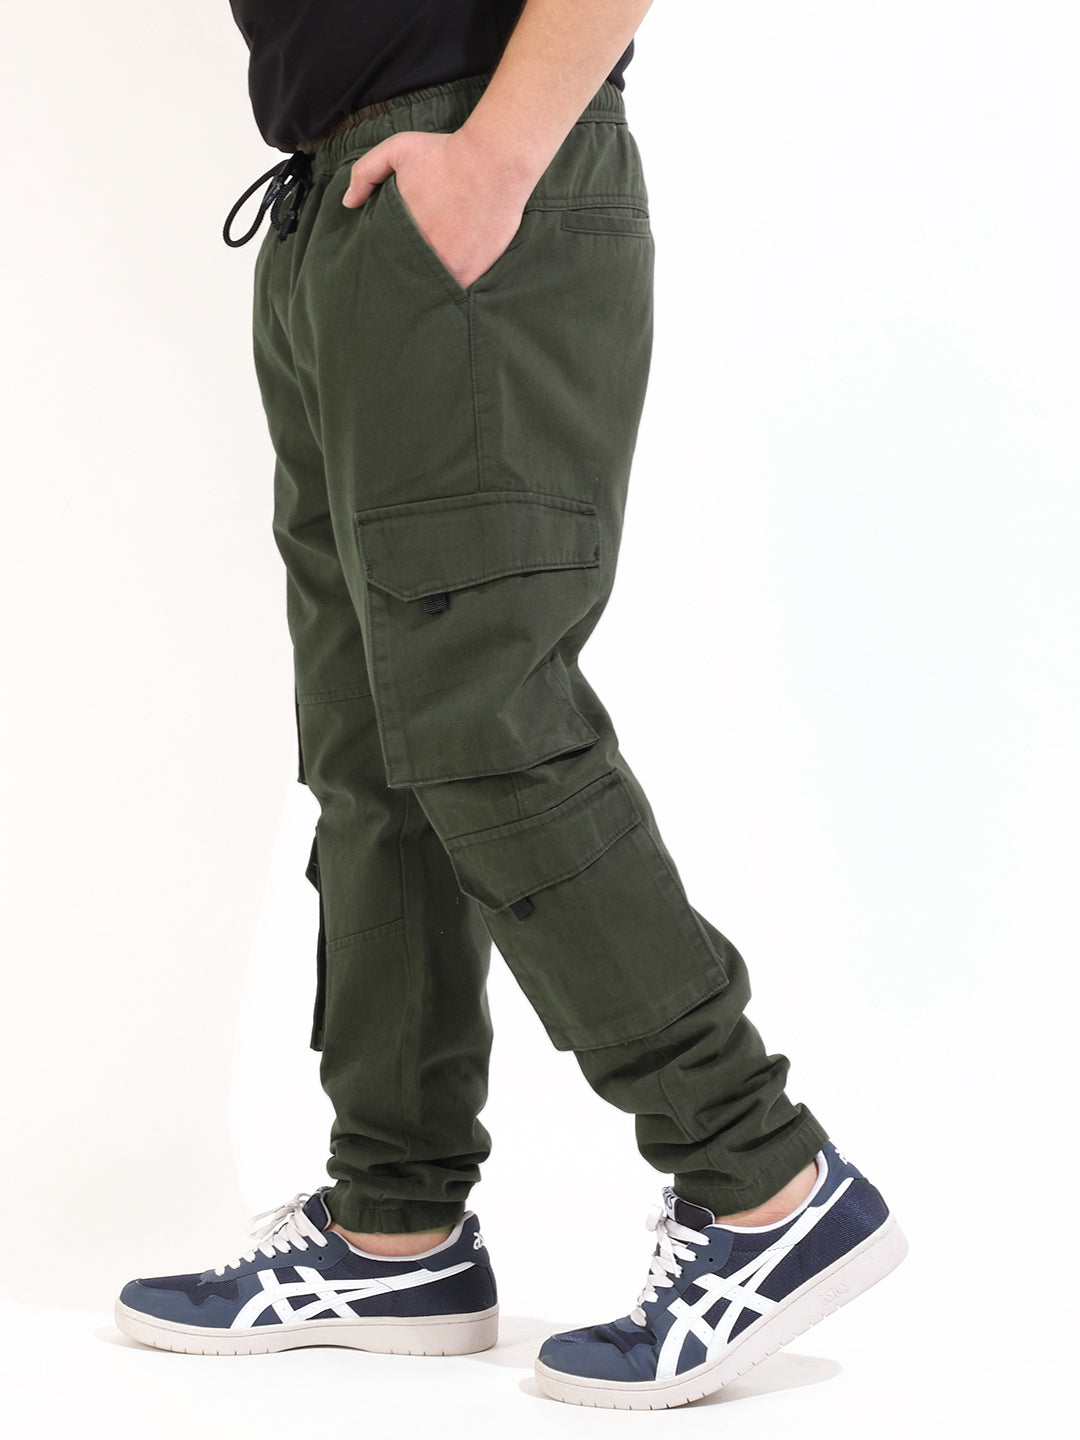 Olive 8 Pocket Cotton Twill Baggy Fit Cargo